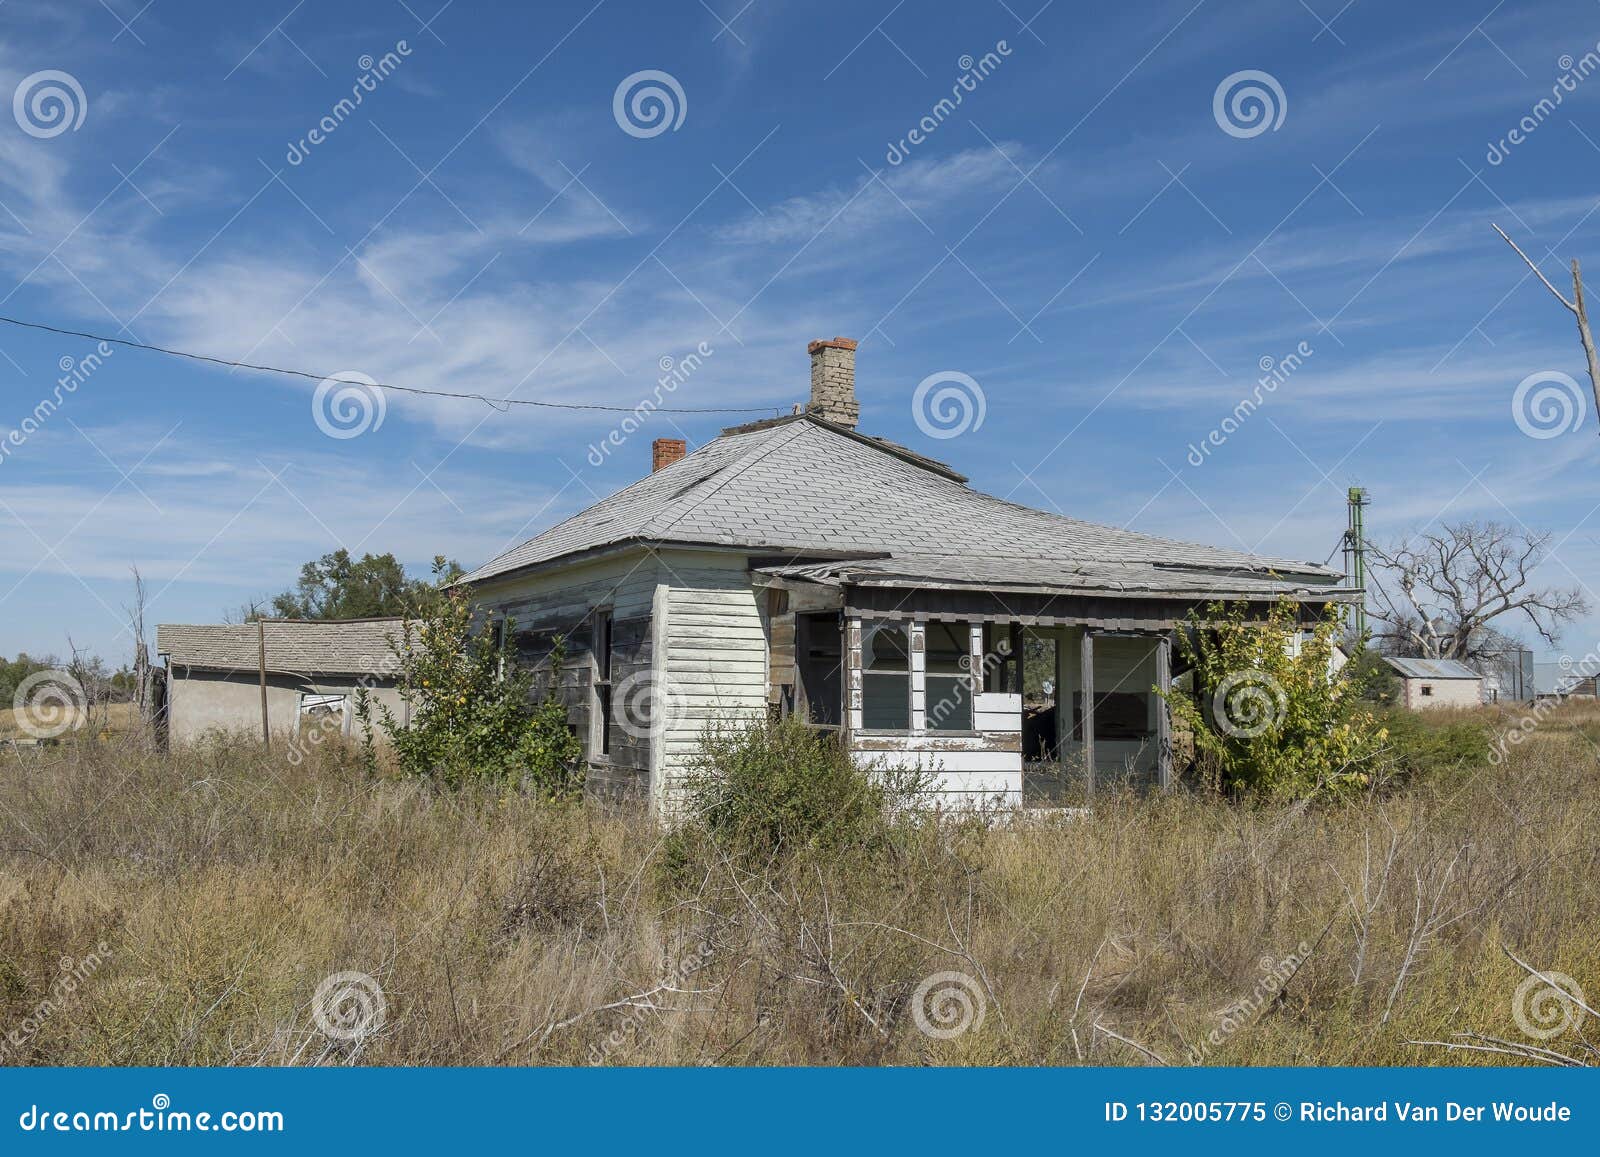 Old Abandoned House in Ghost Town Editorial Image - Image of